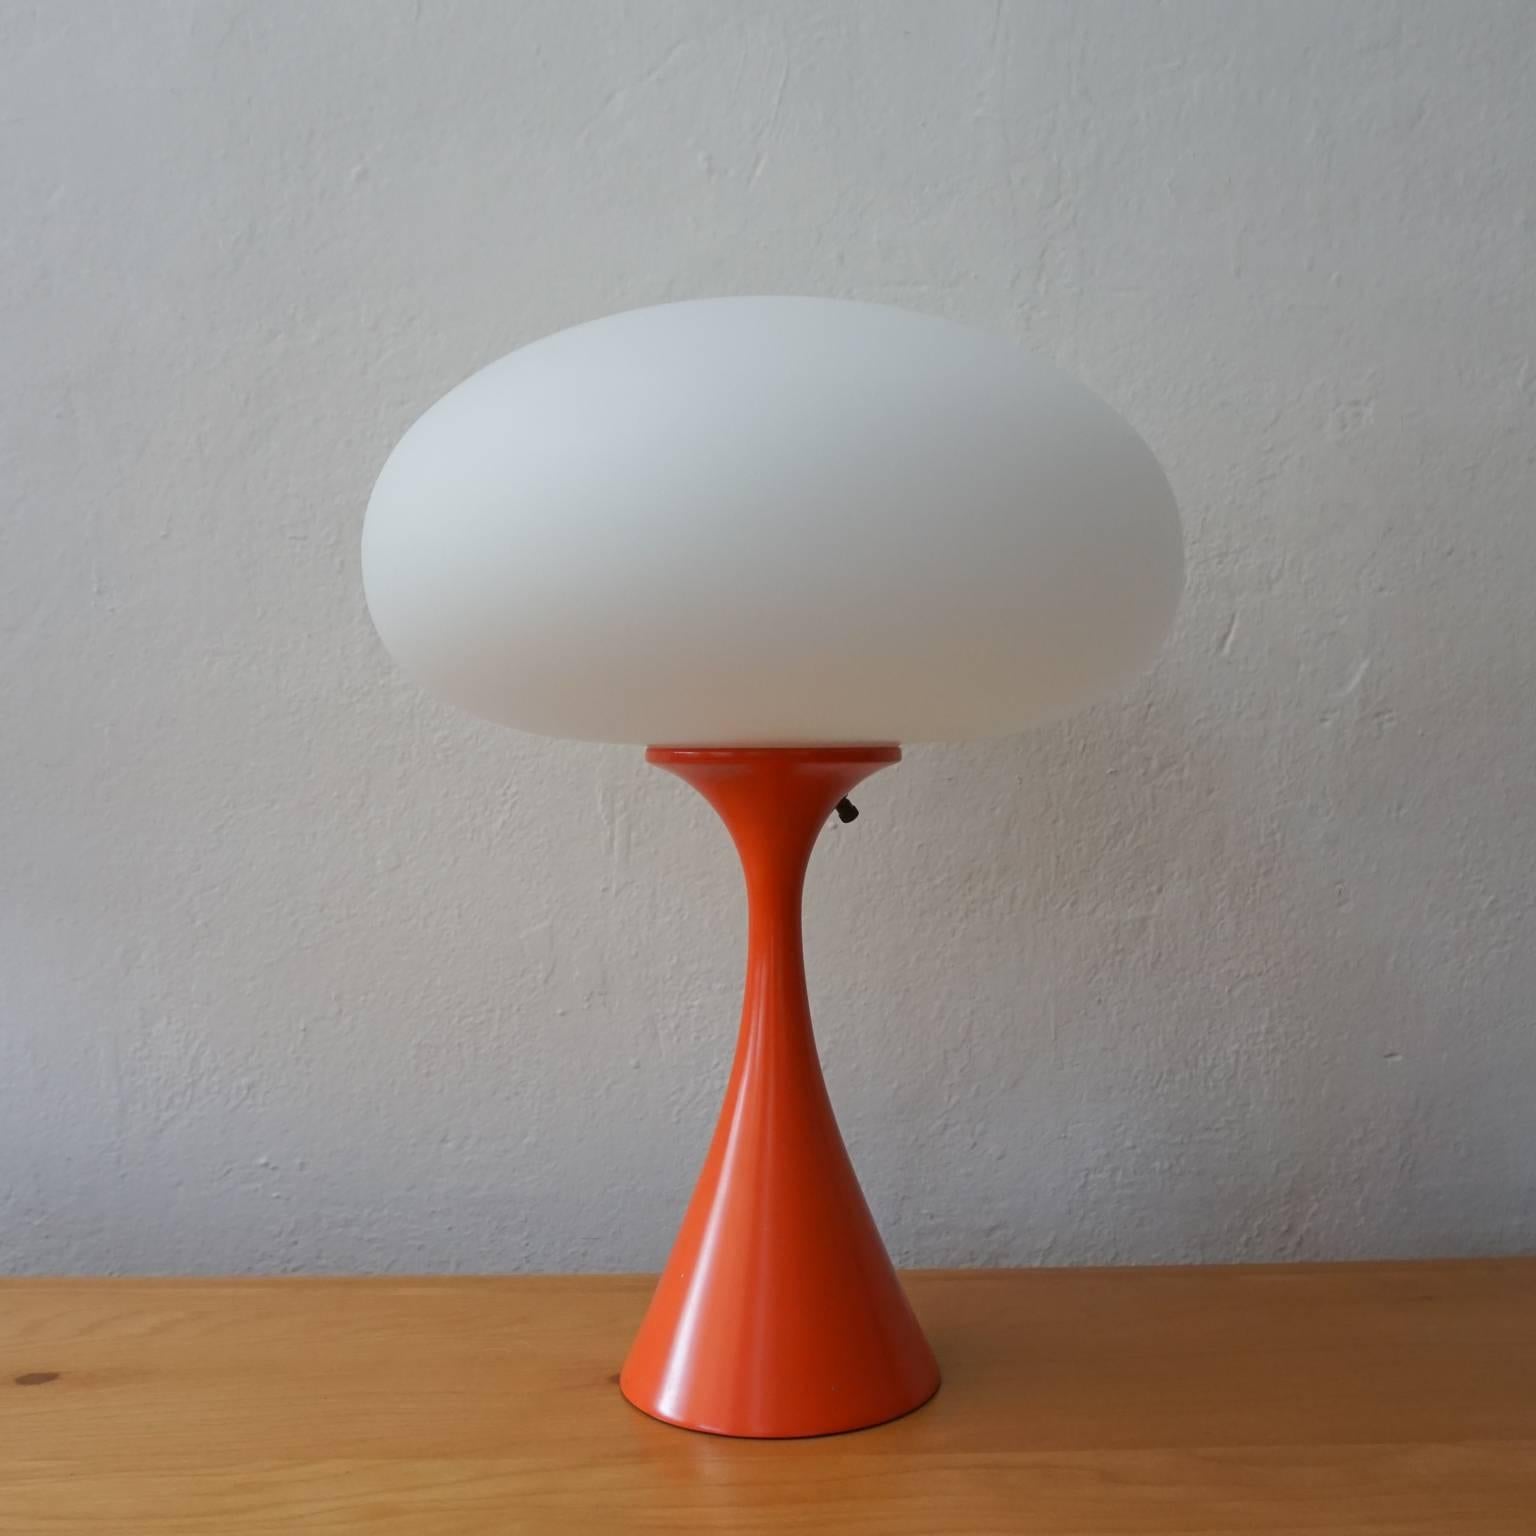 1960s table lamp by Laurel. Original orange enamel metal base with a glass shade.